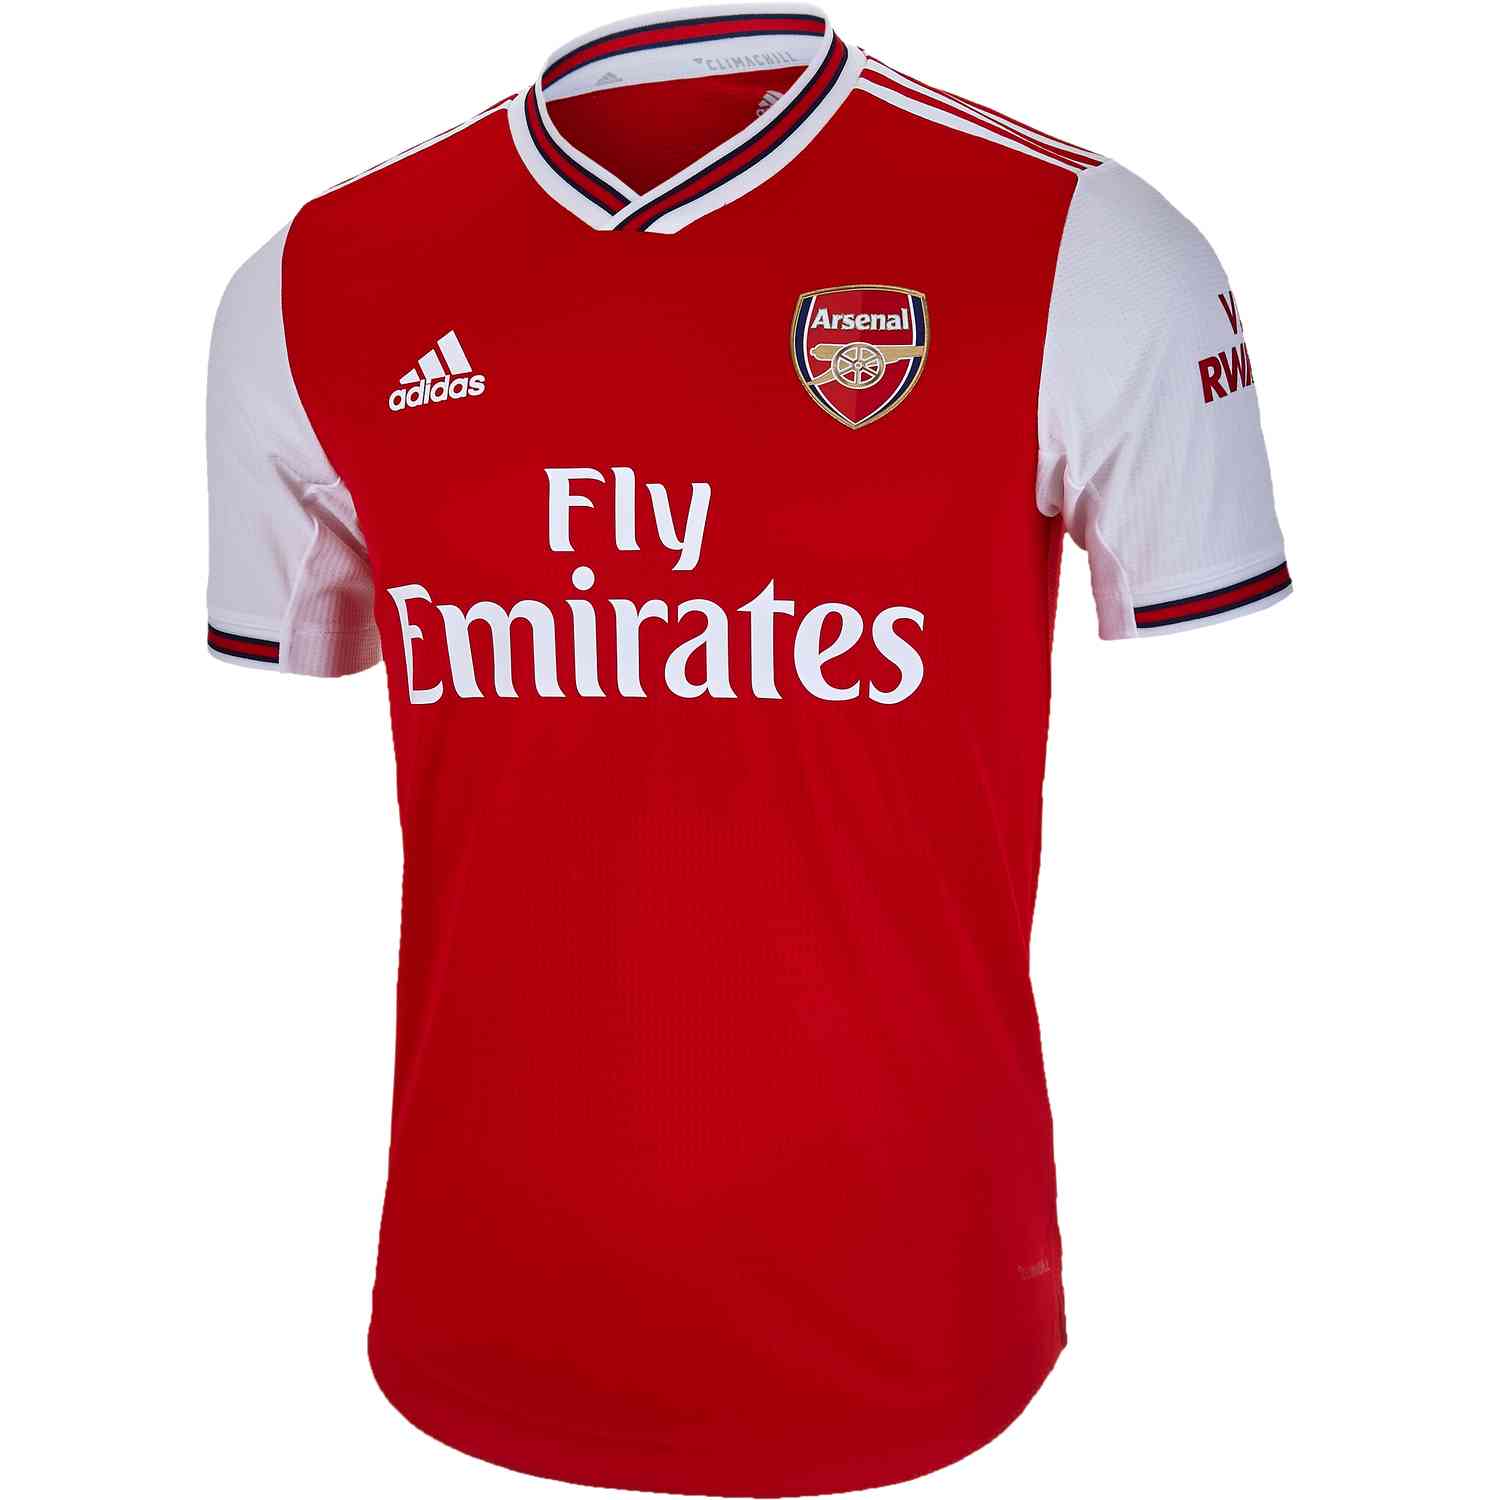 2019/20 adidas Arsenal Home Authentic Jersey - SoccerPro